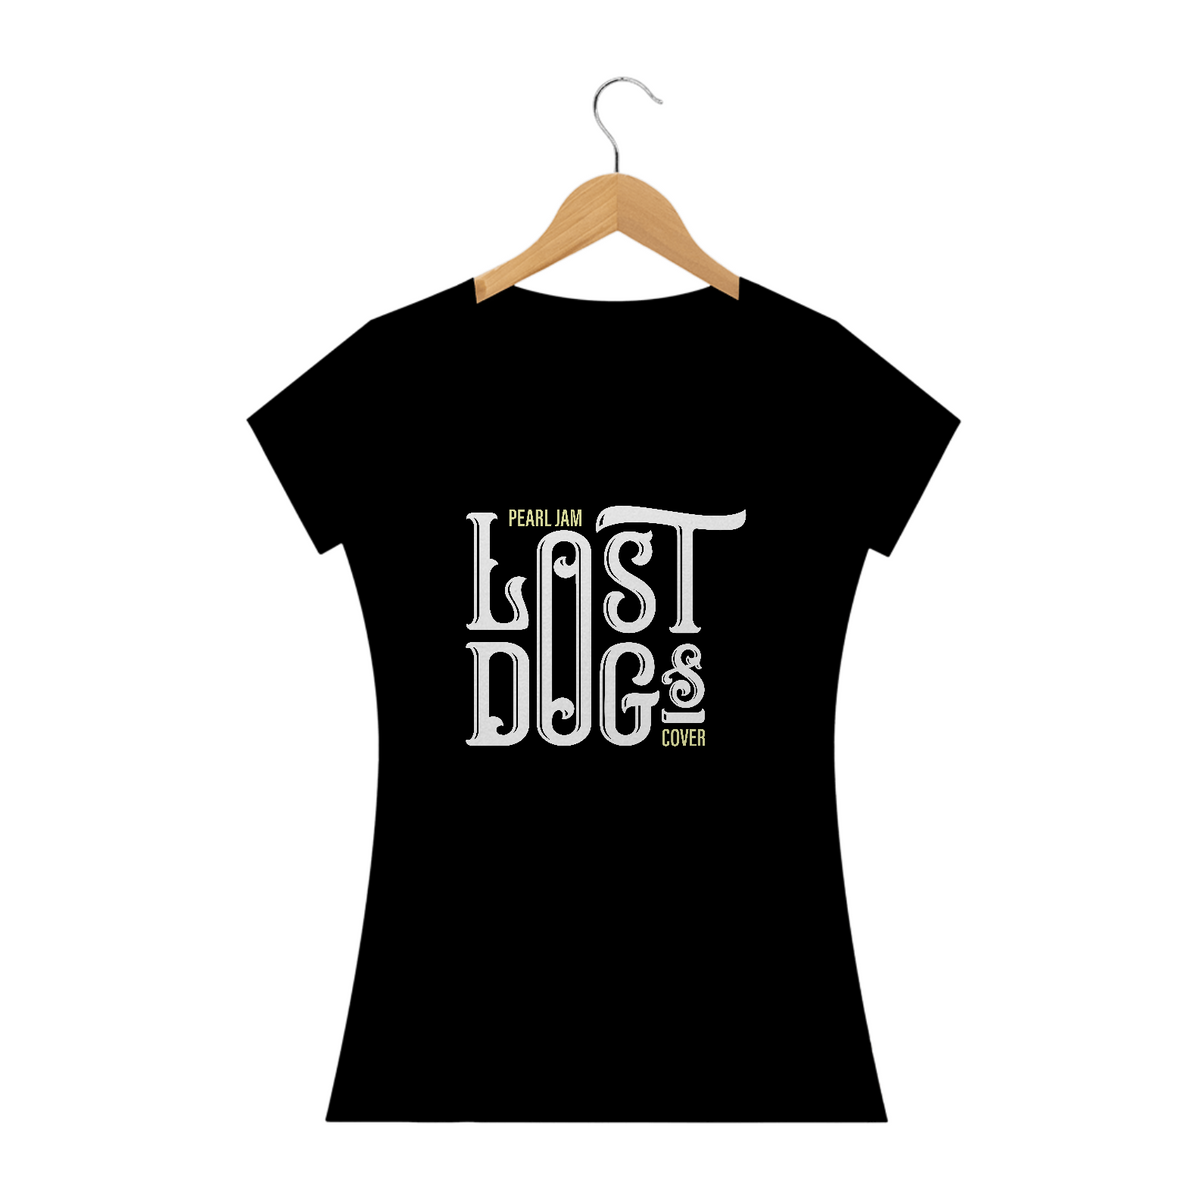 Nome do produto: BABY LOOK - LOST DOGS - PEARL JAM COVER